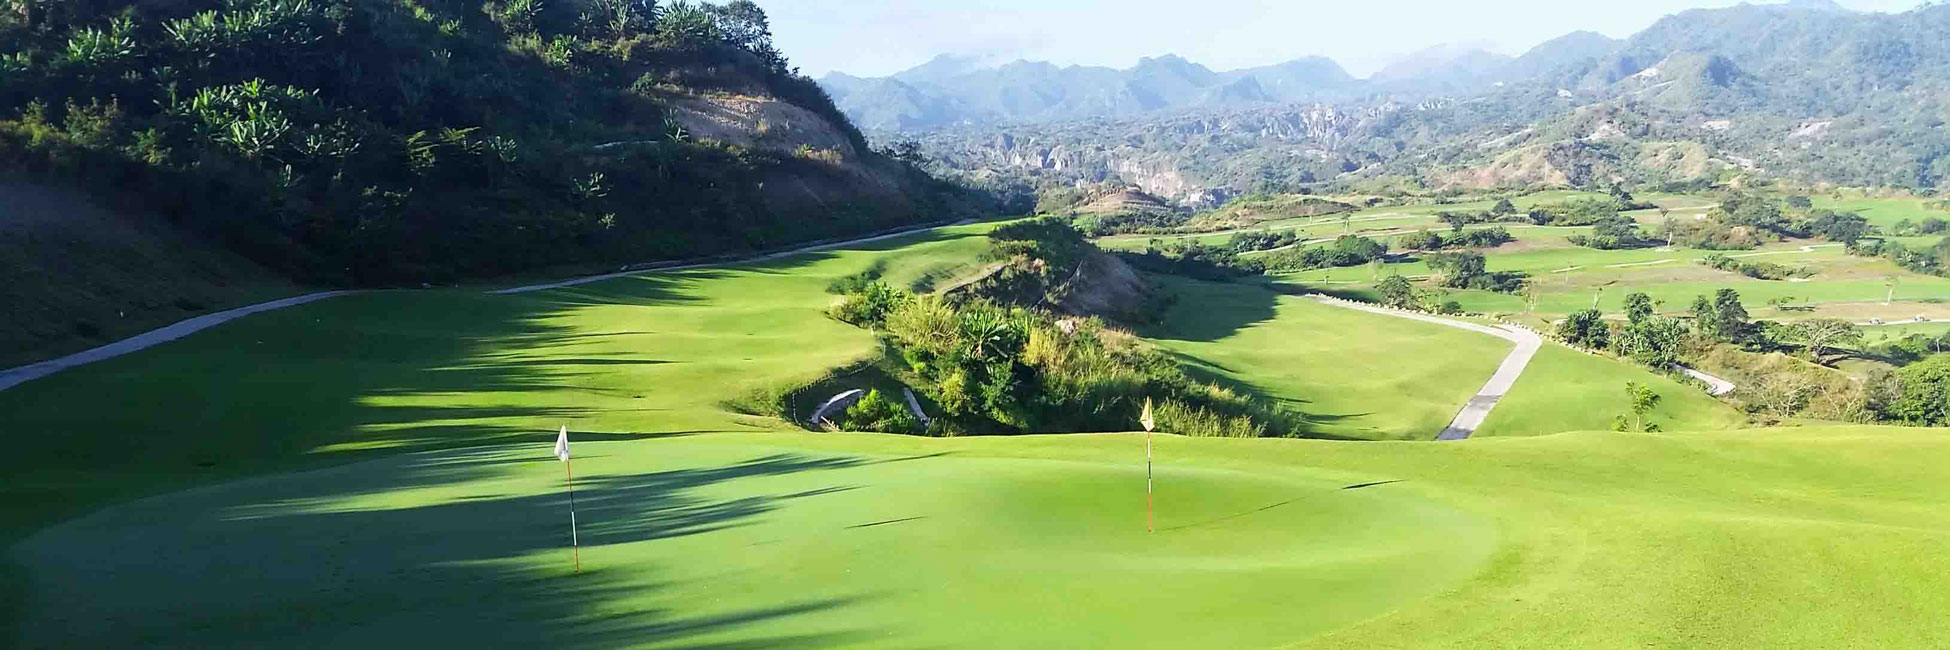 dating site for golf in the philippines